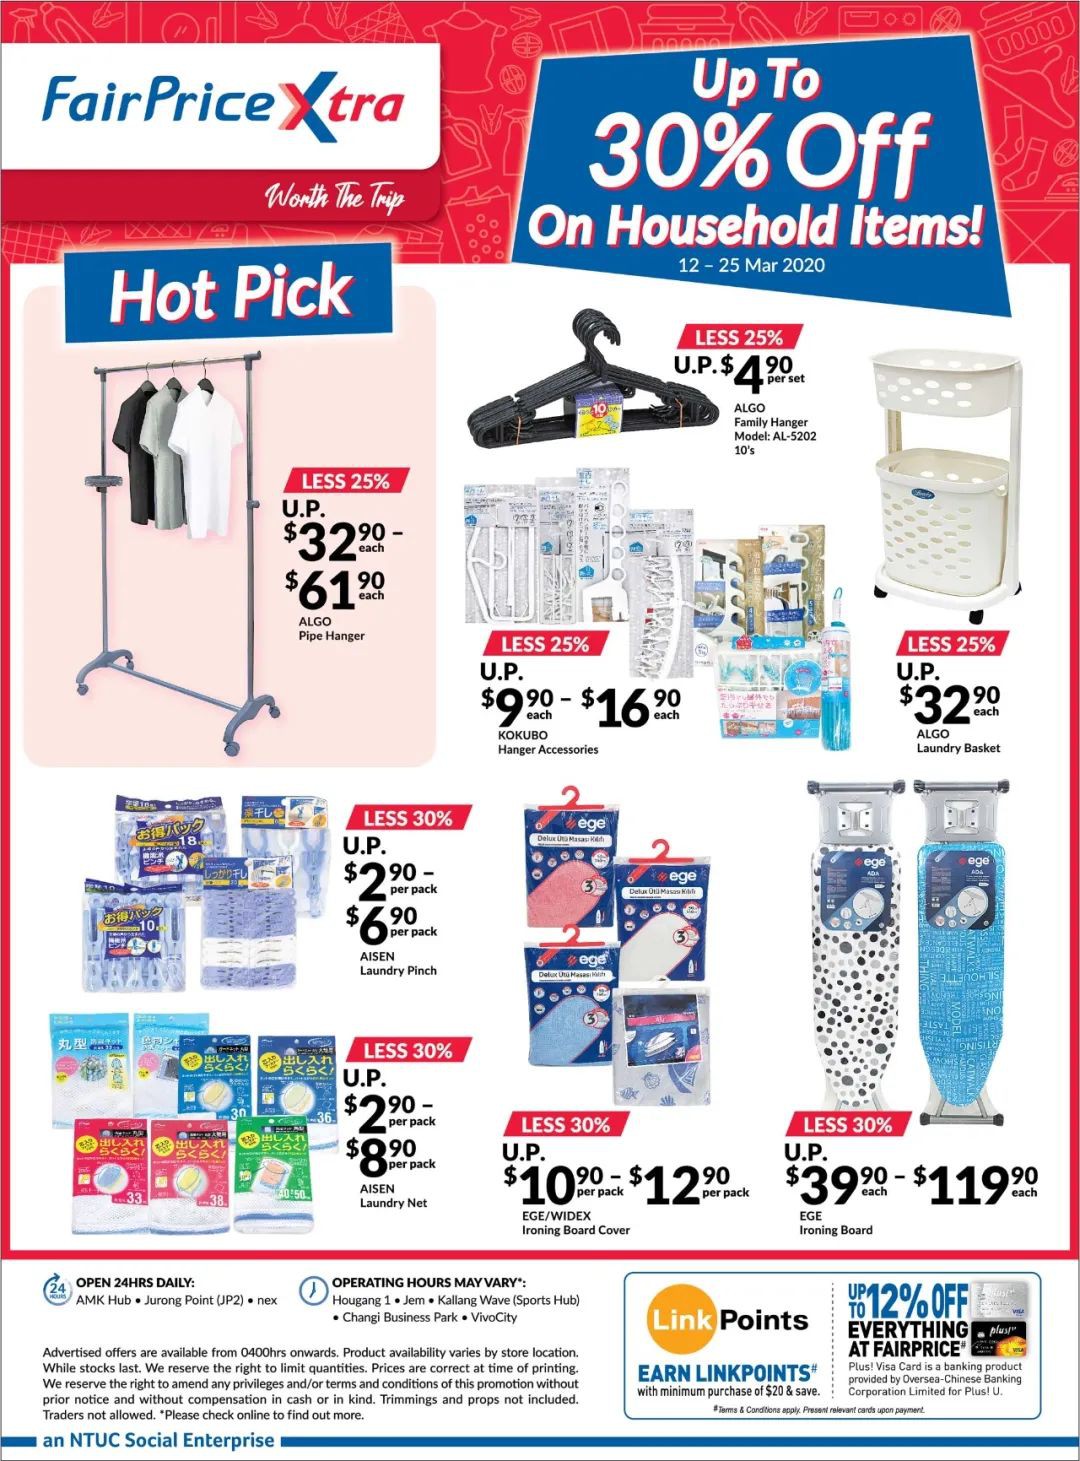 This week's deals and promotions you cannot miss!